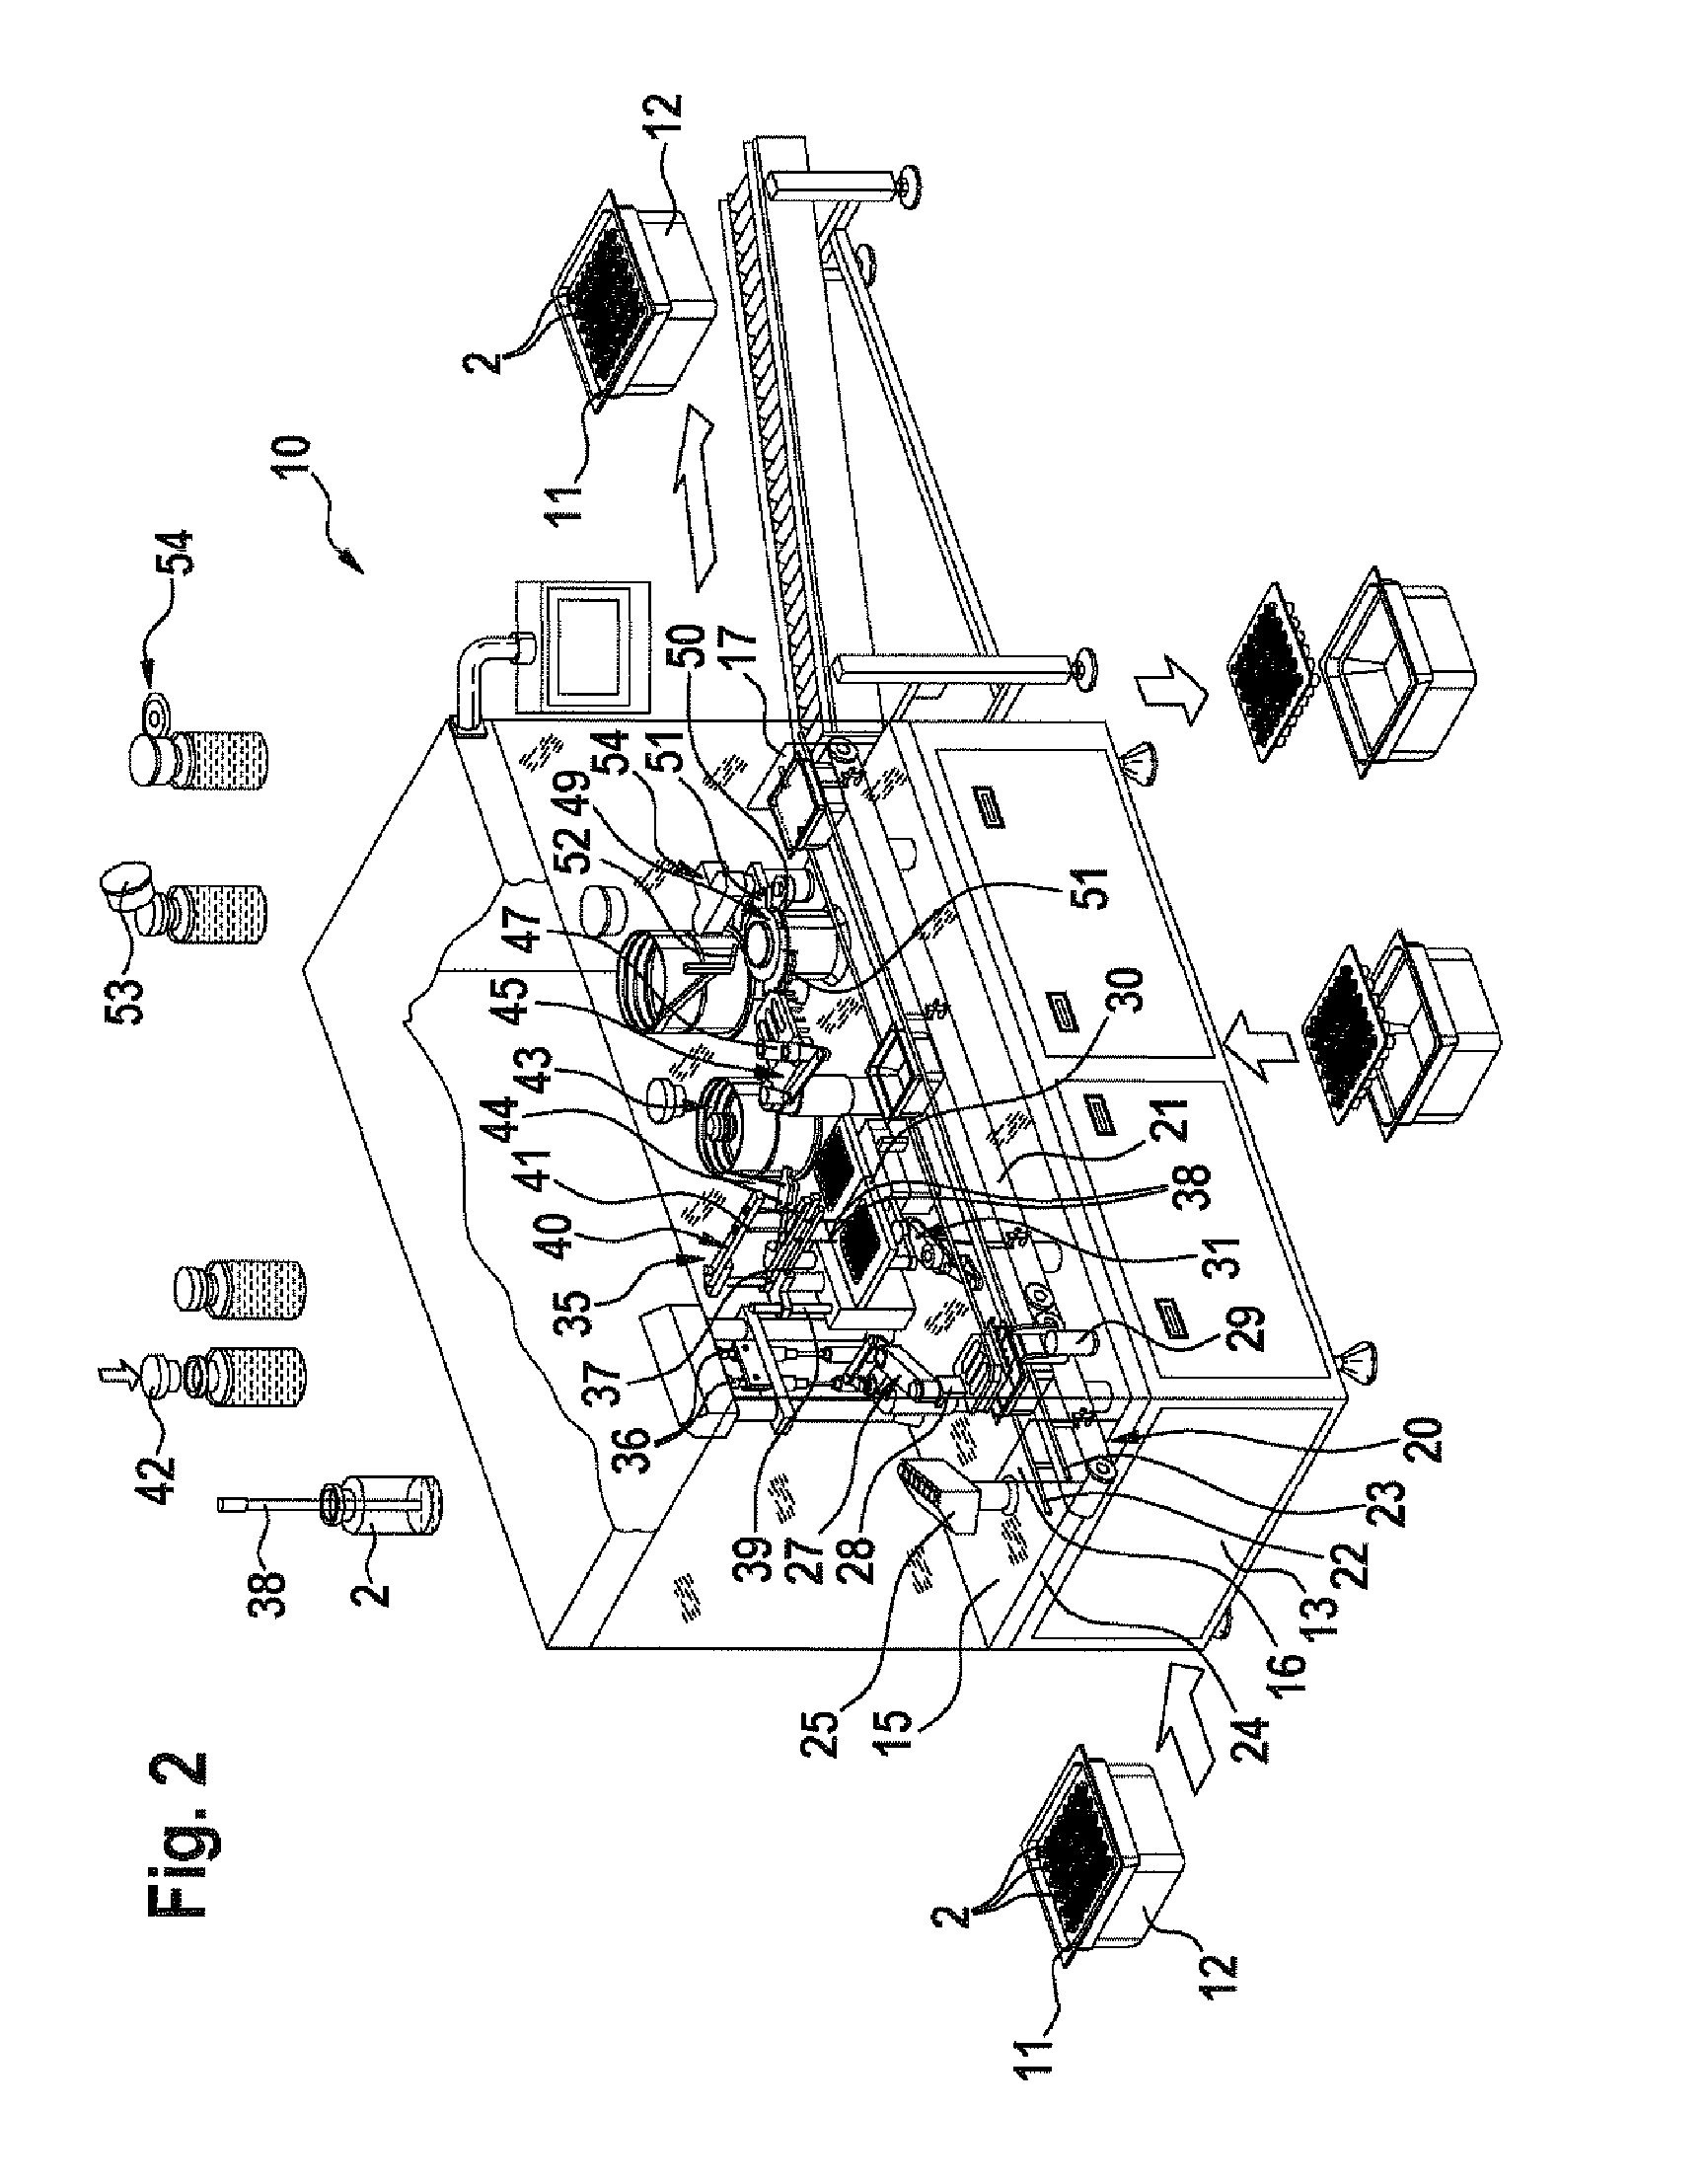 Device for filling and sealing pharmaceutical containers